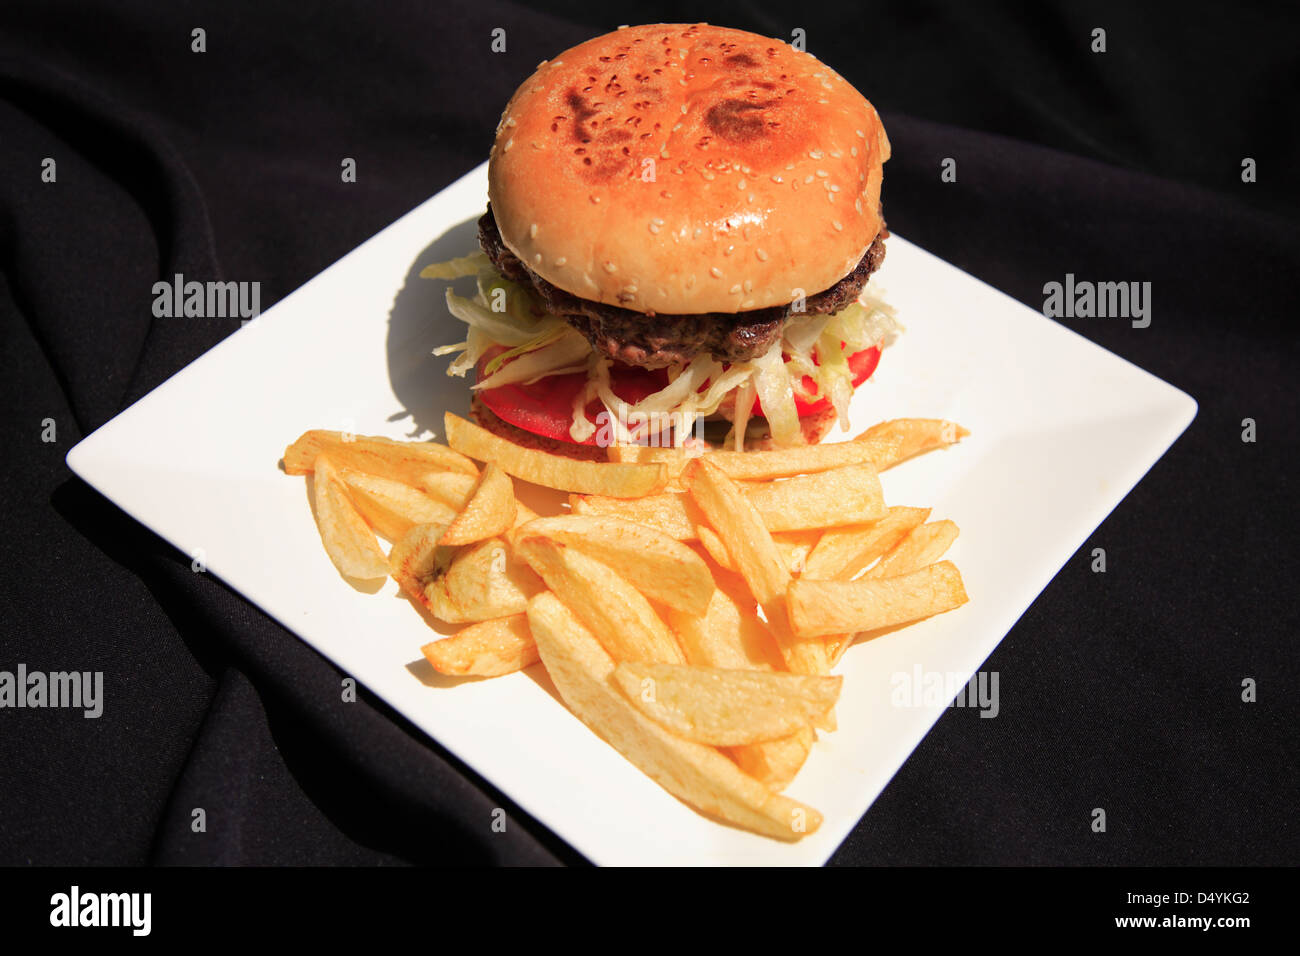 Beef burger and salad with fries on a white plate Stock Photo